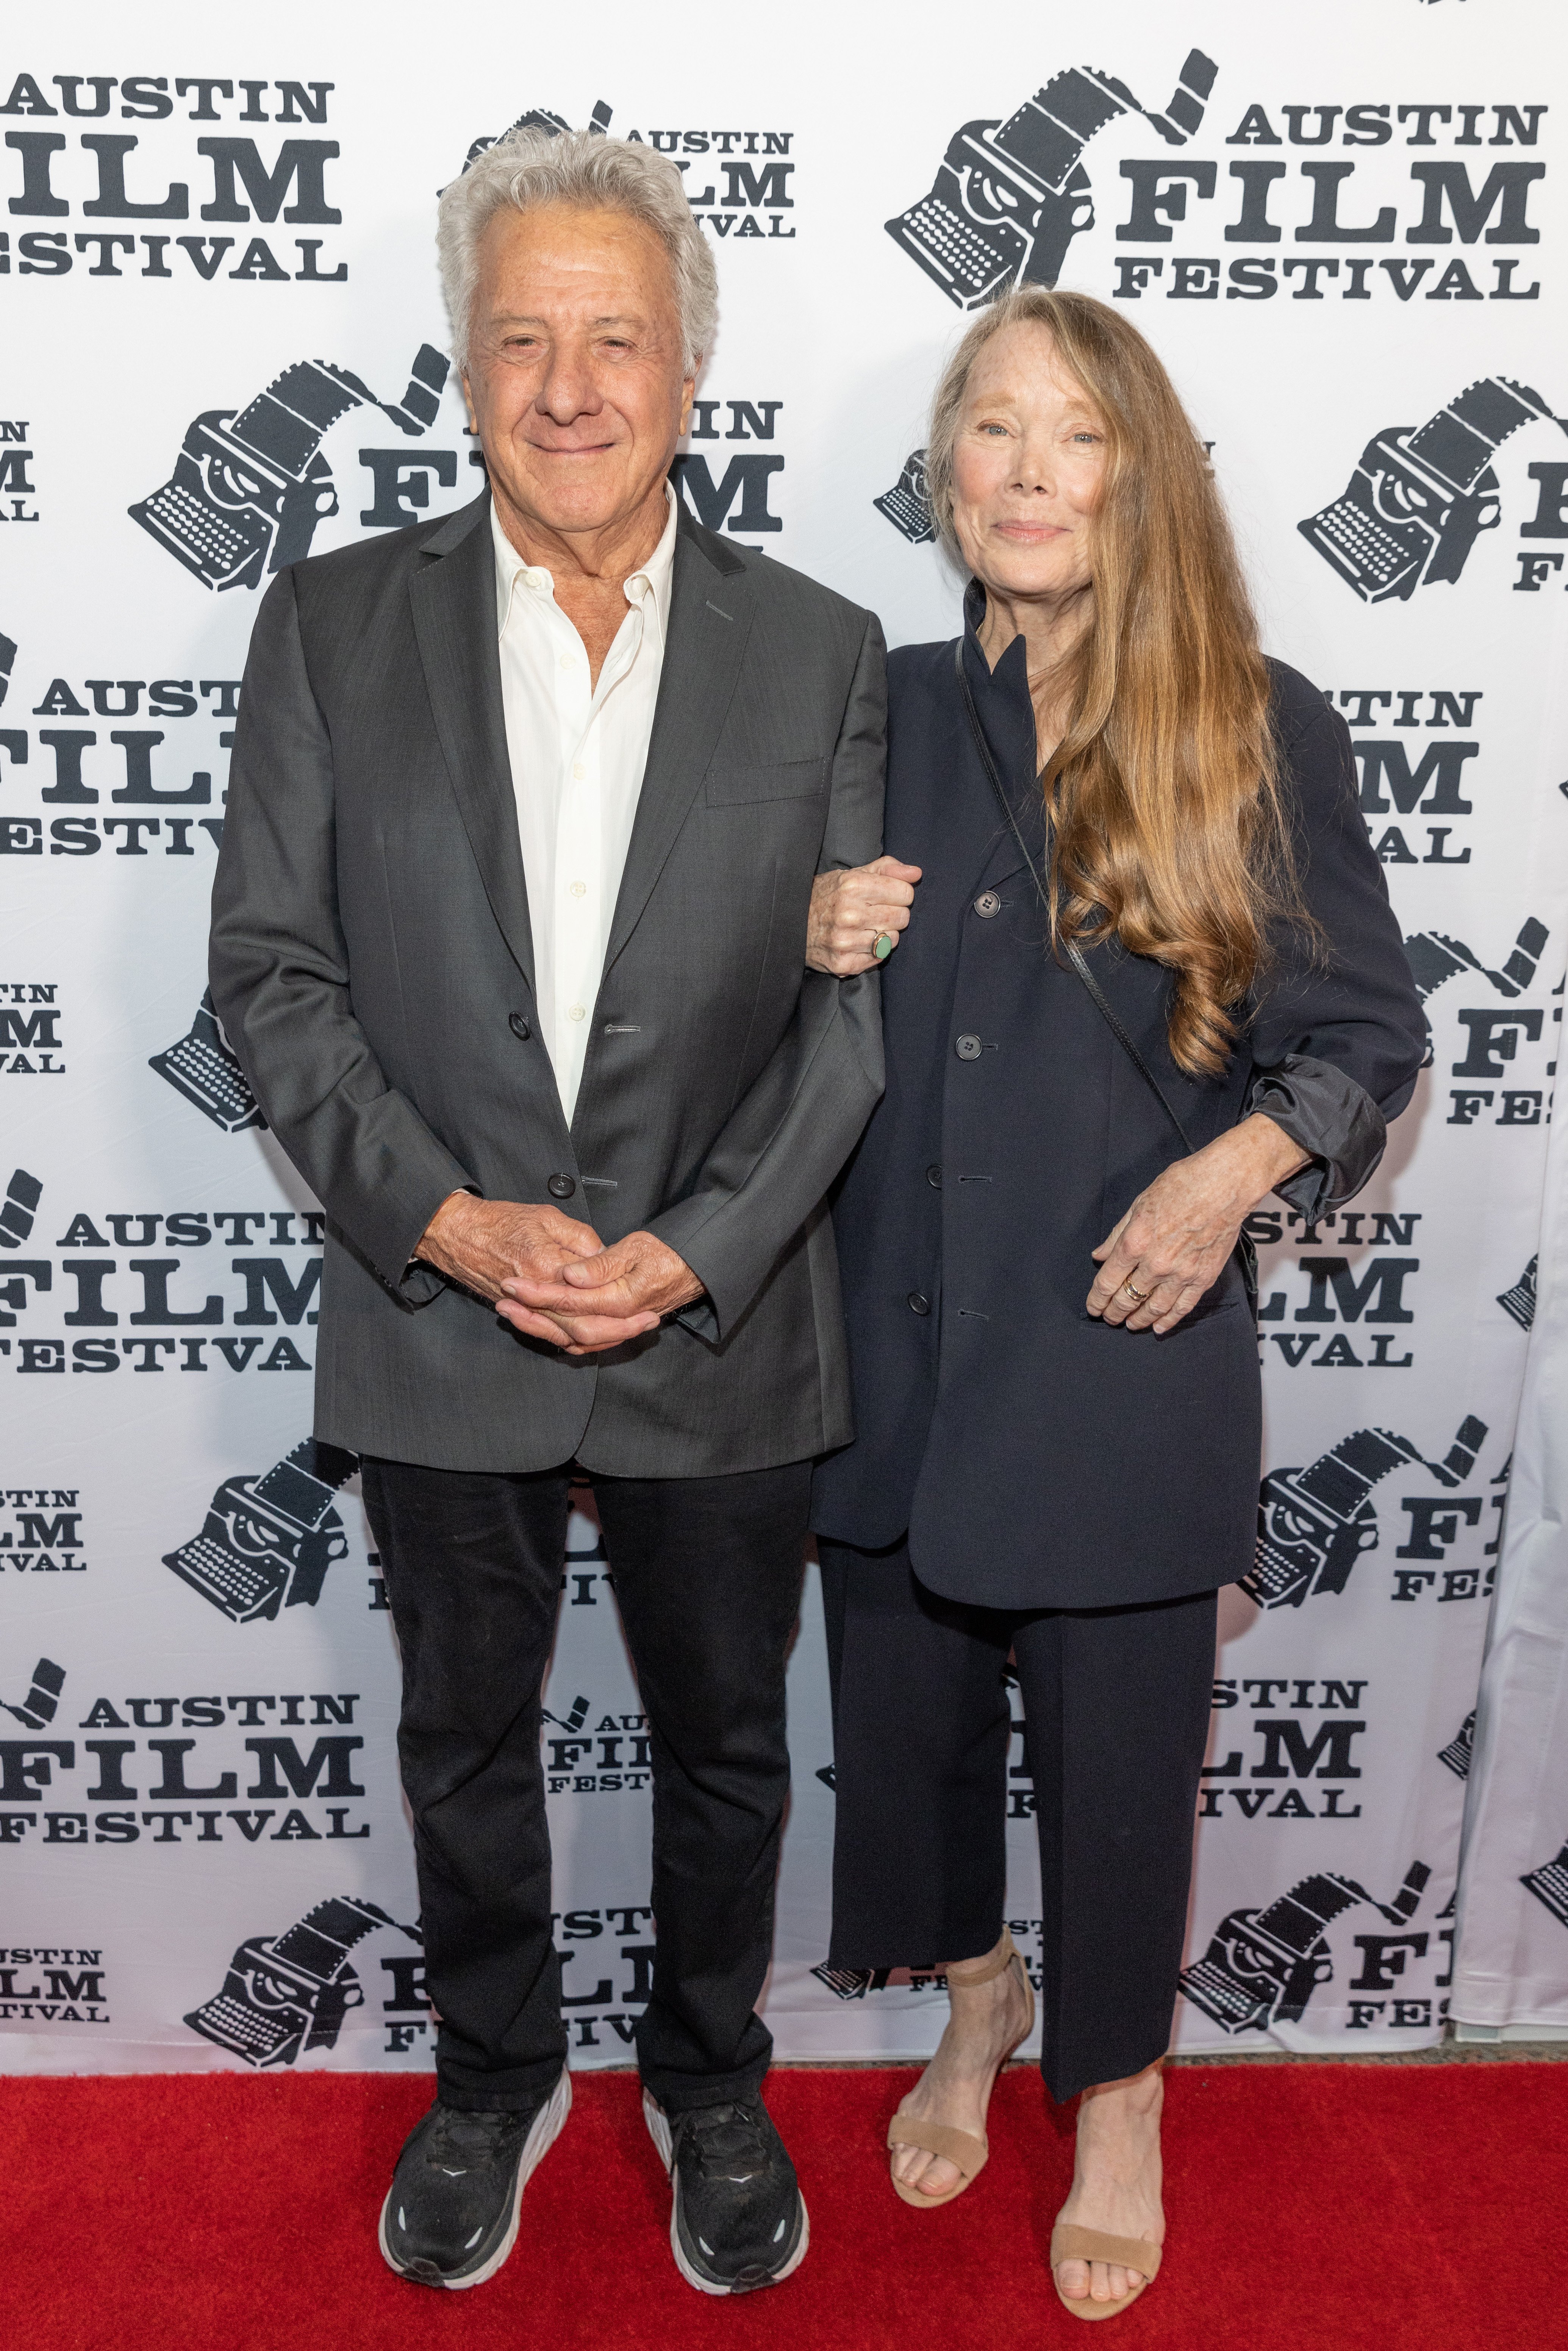 Dustin Hoffman (L) and Sissy Spacek attend the world premiere of "Sam & Kate" during the 2022 Austin Film Festival at Paramount Theatre on October 28, 2022 in Austin, Texas | Source: Getty Images